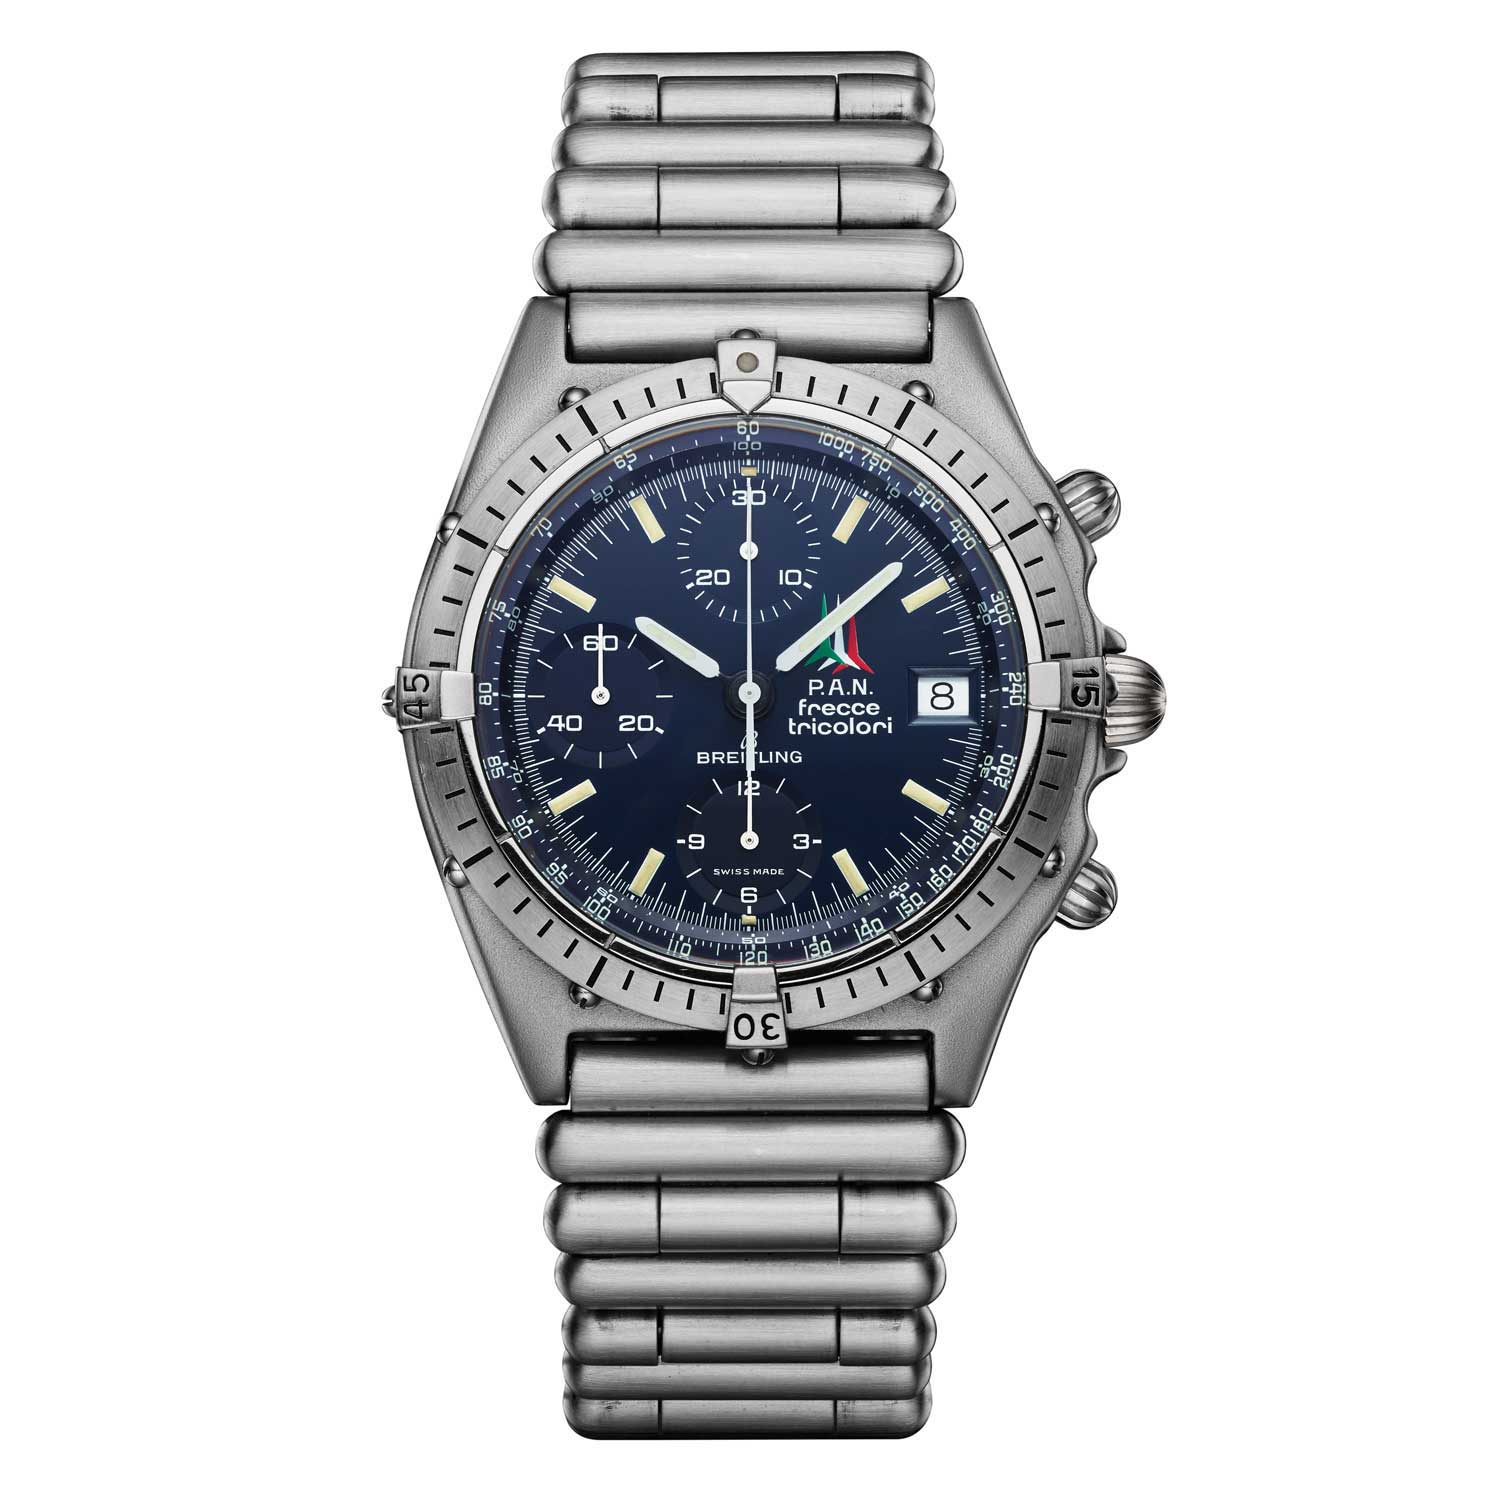 Breitling Frecce Tricolori watch from 1983